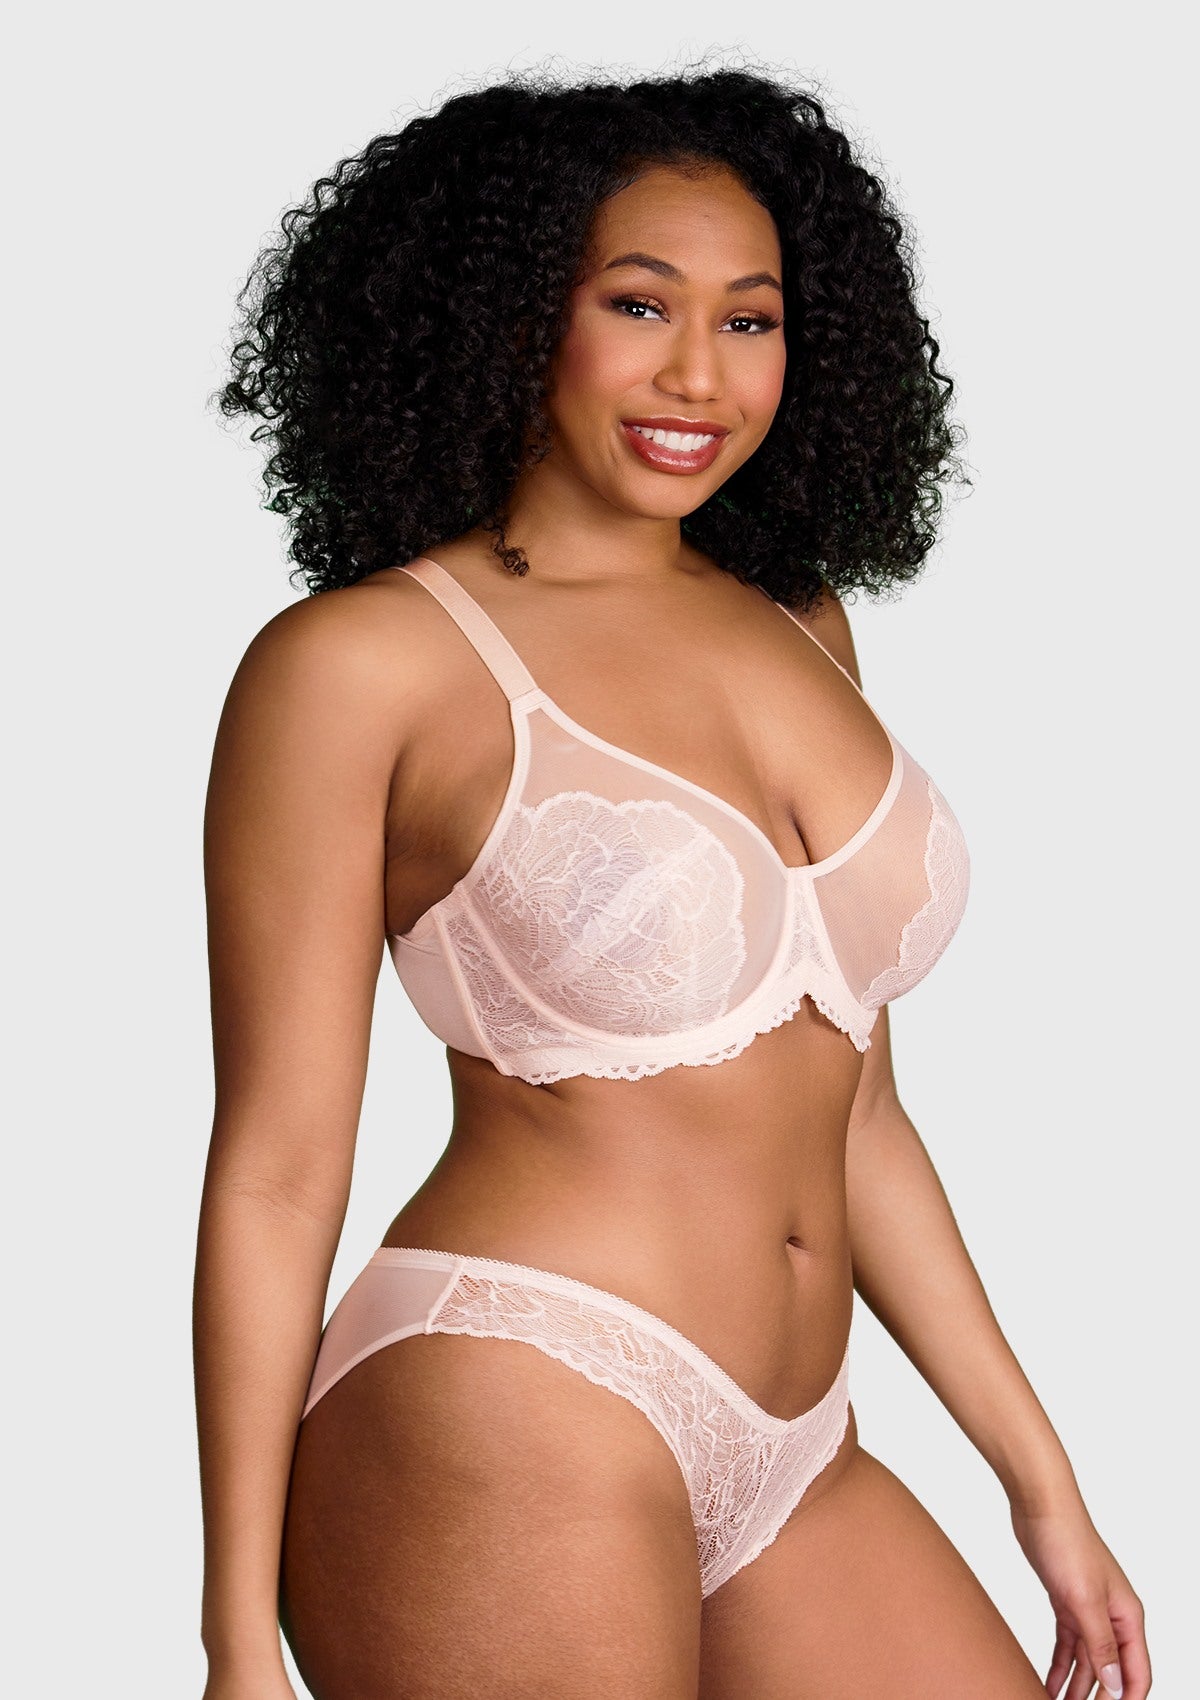 HSIA Blossom Sheer Lace Bra: Comfortable Underwire Bra For Big Busts - White / 38 / C